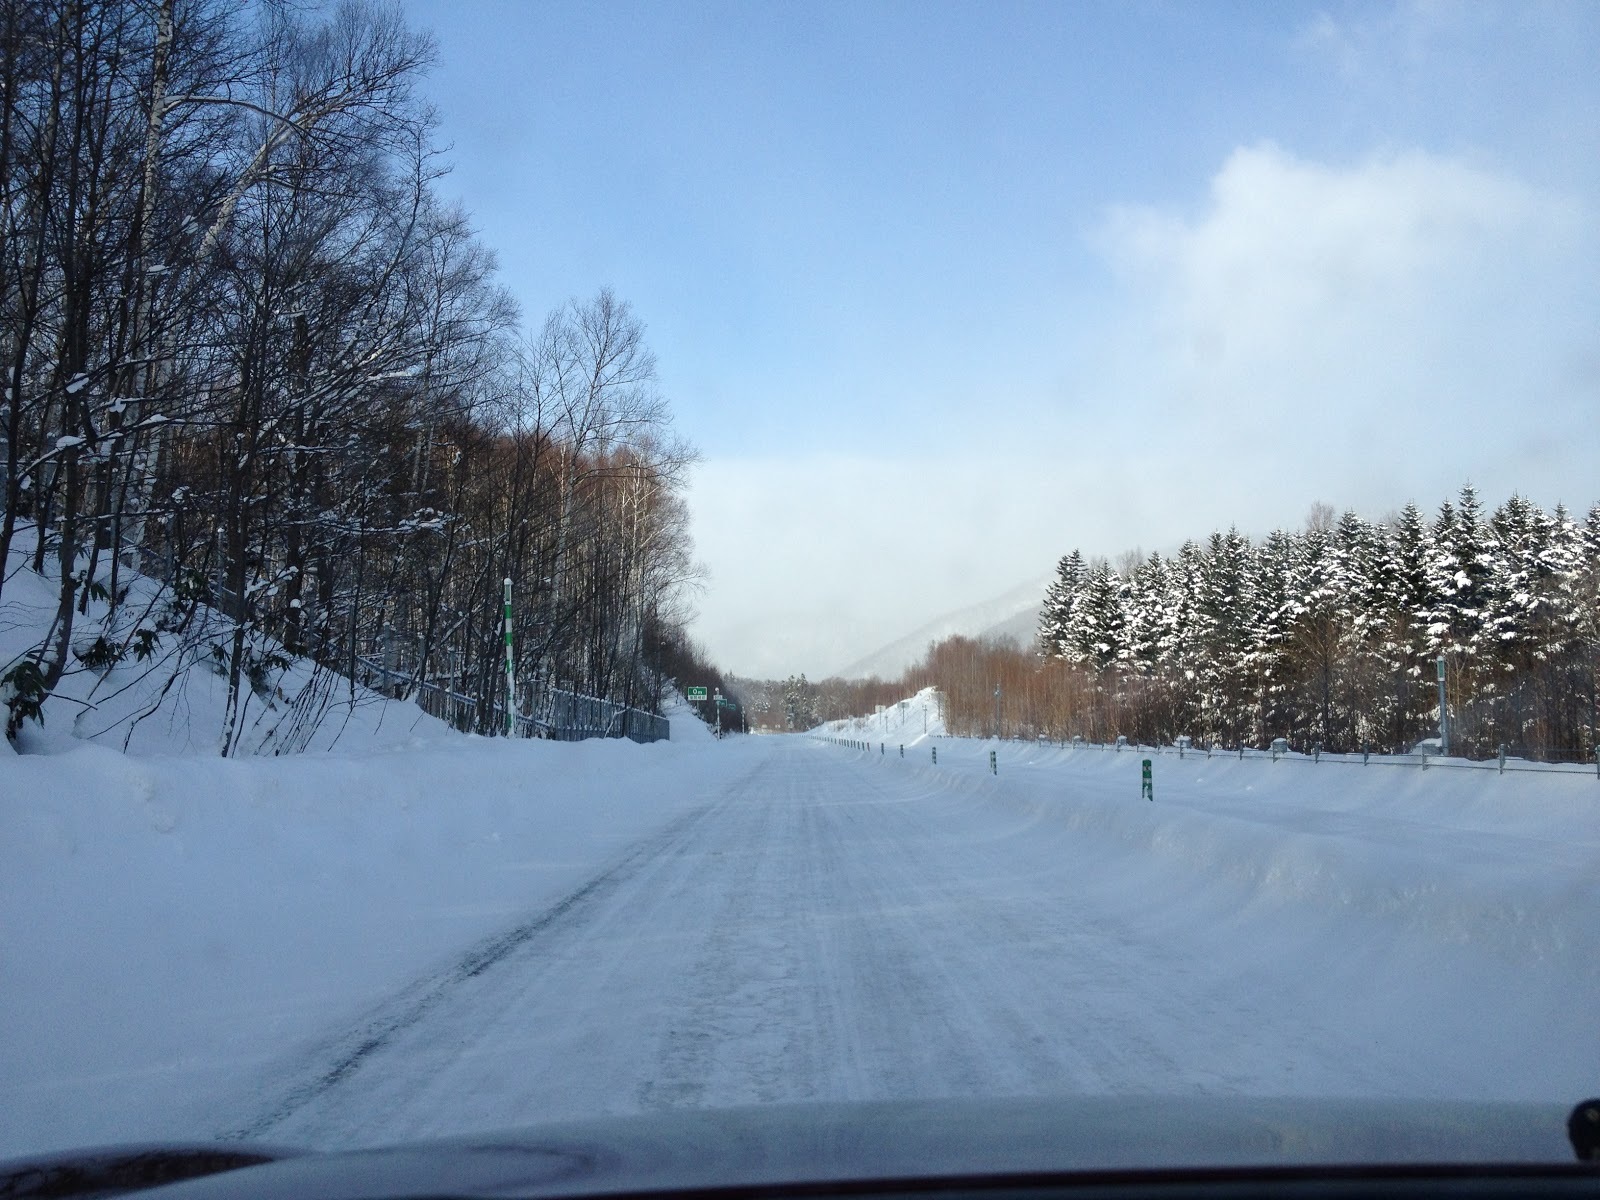 this is the japanese equivalent of the interstate. let that set the tone for the winter.